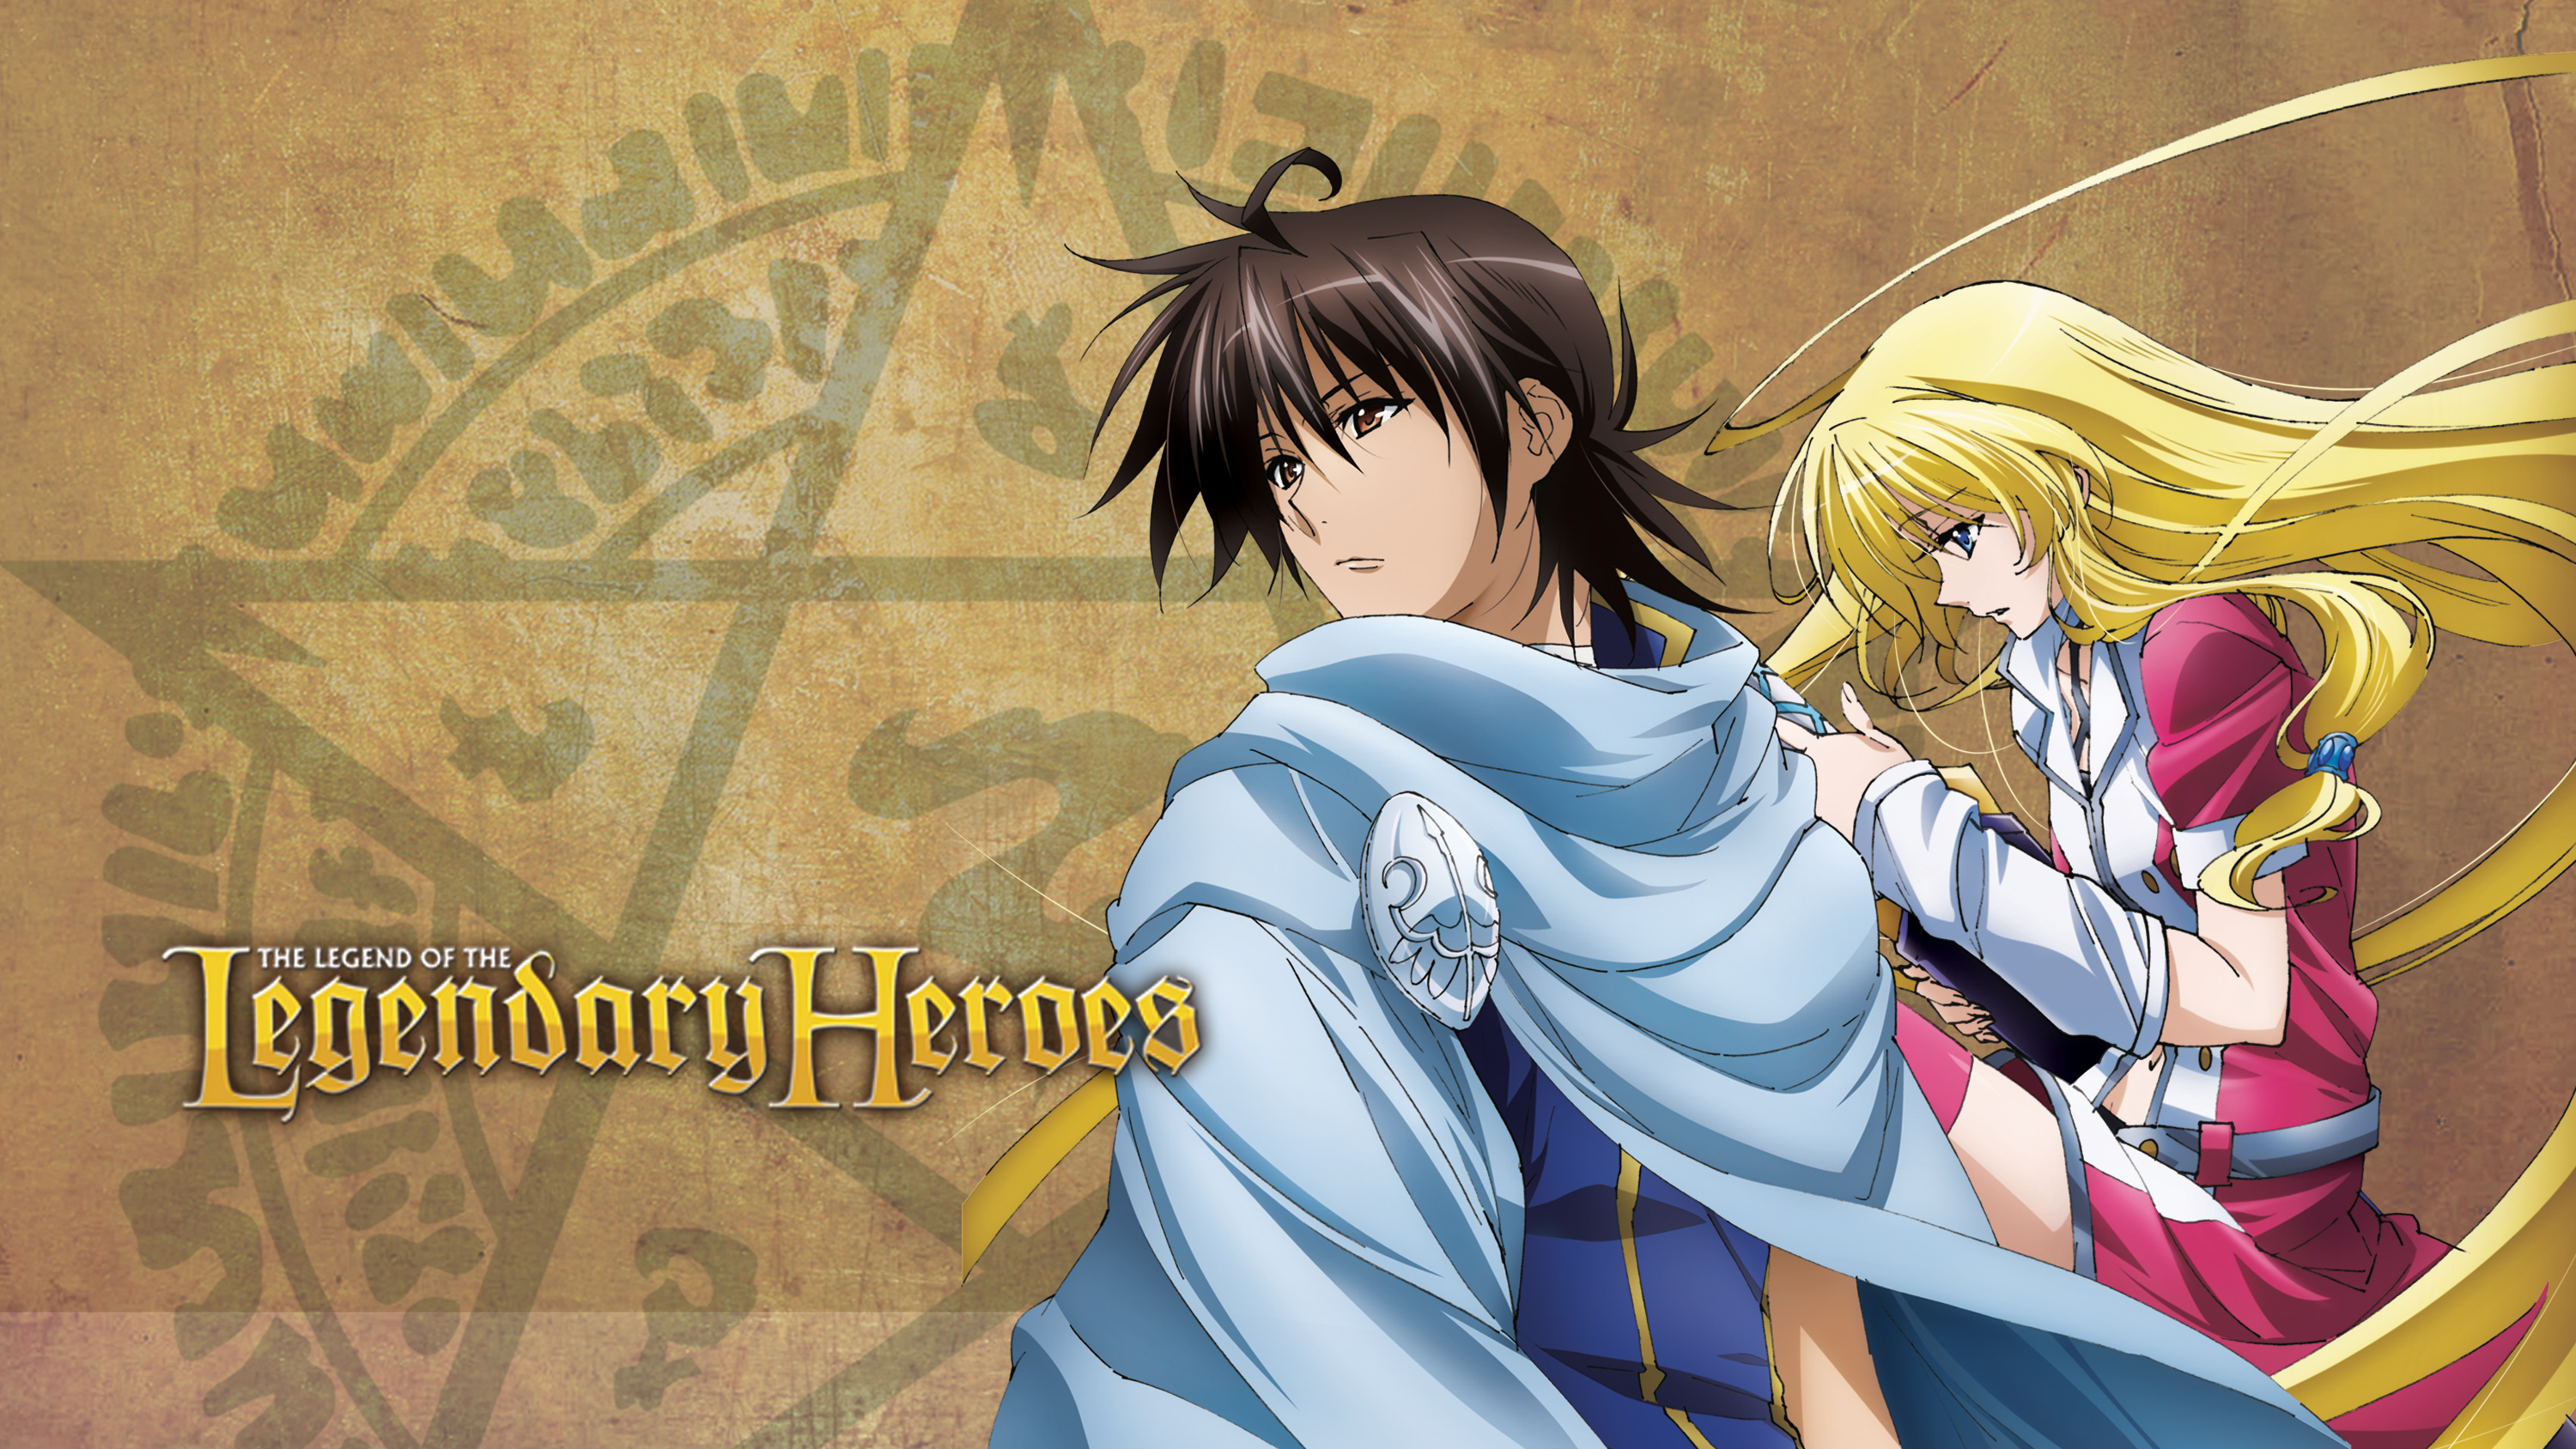 The Legend of the Legendary Heroes HD Wallpaper